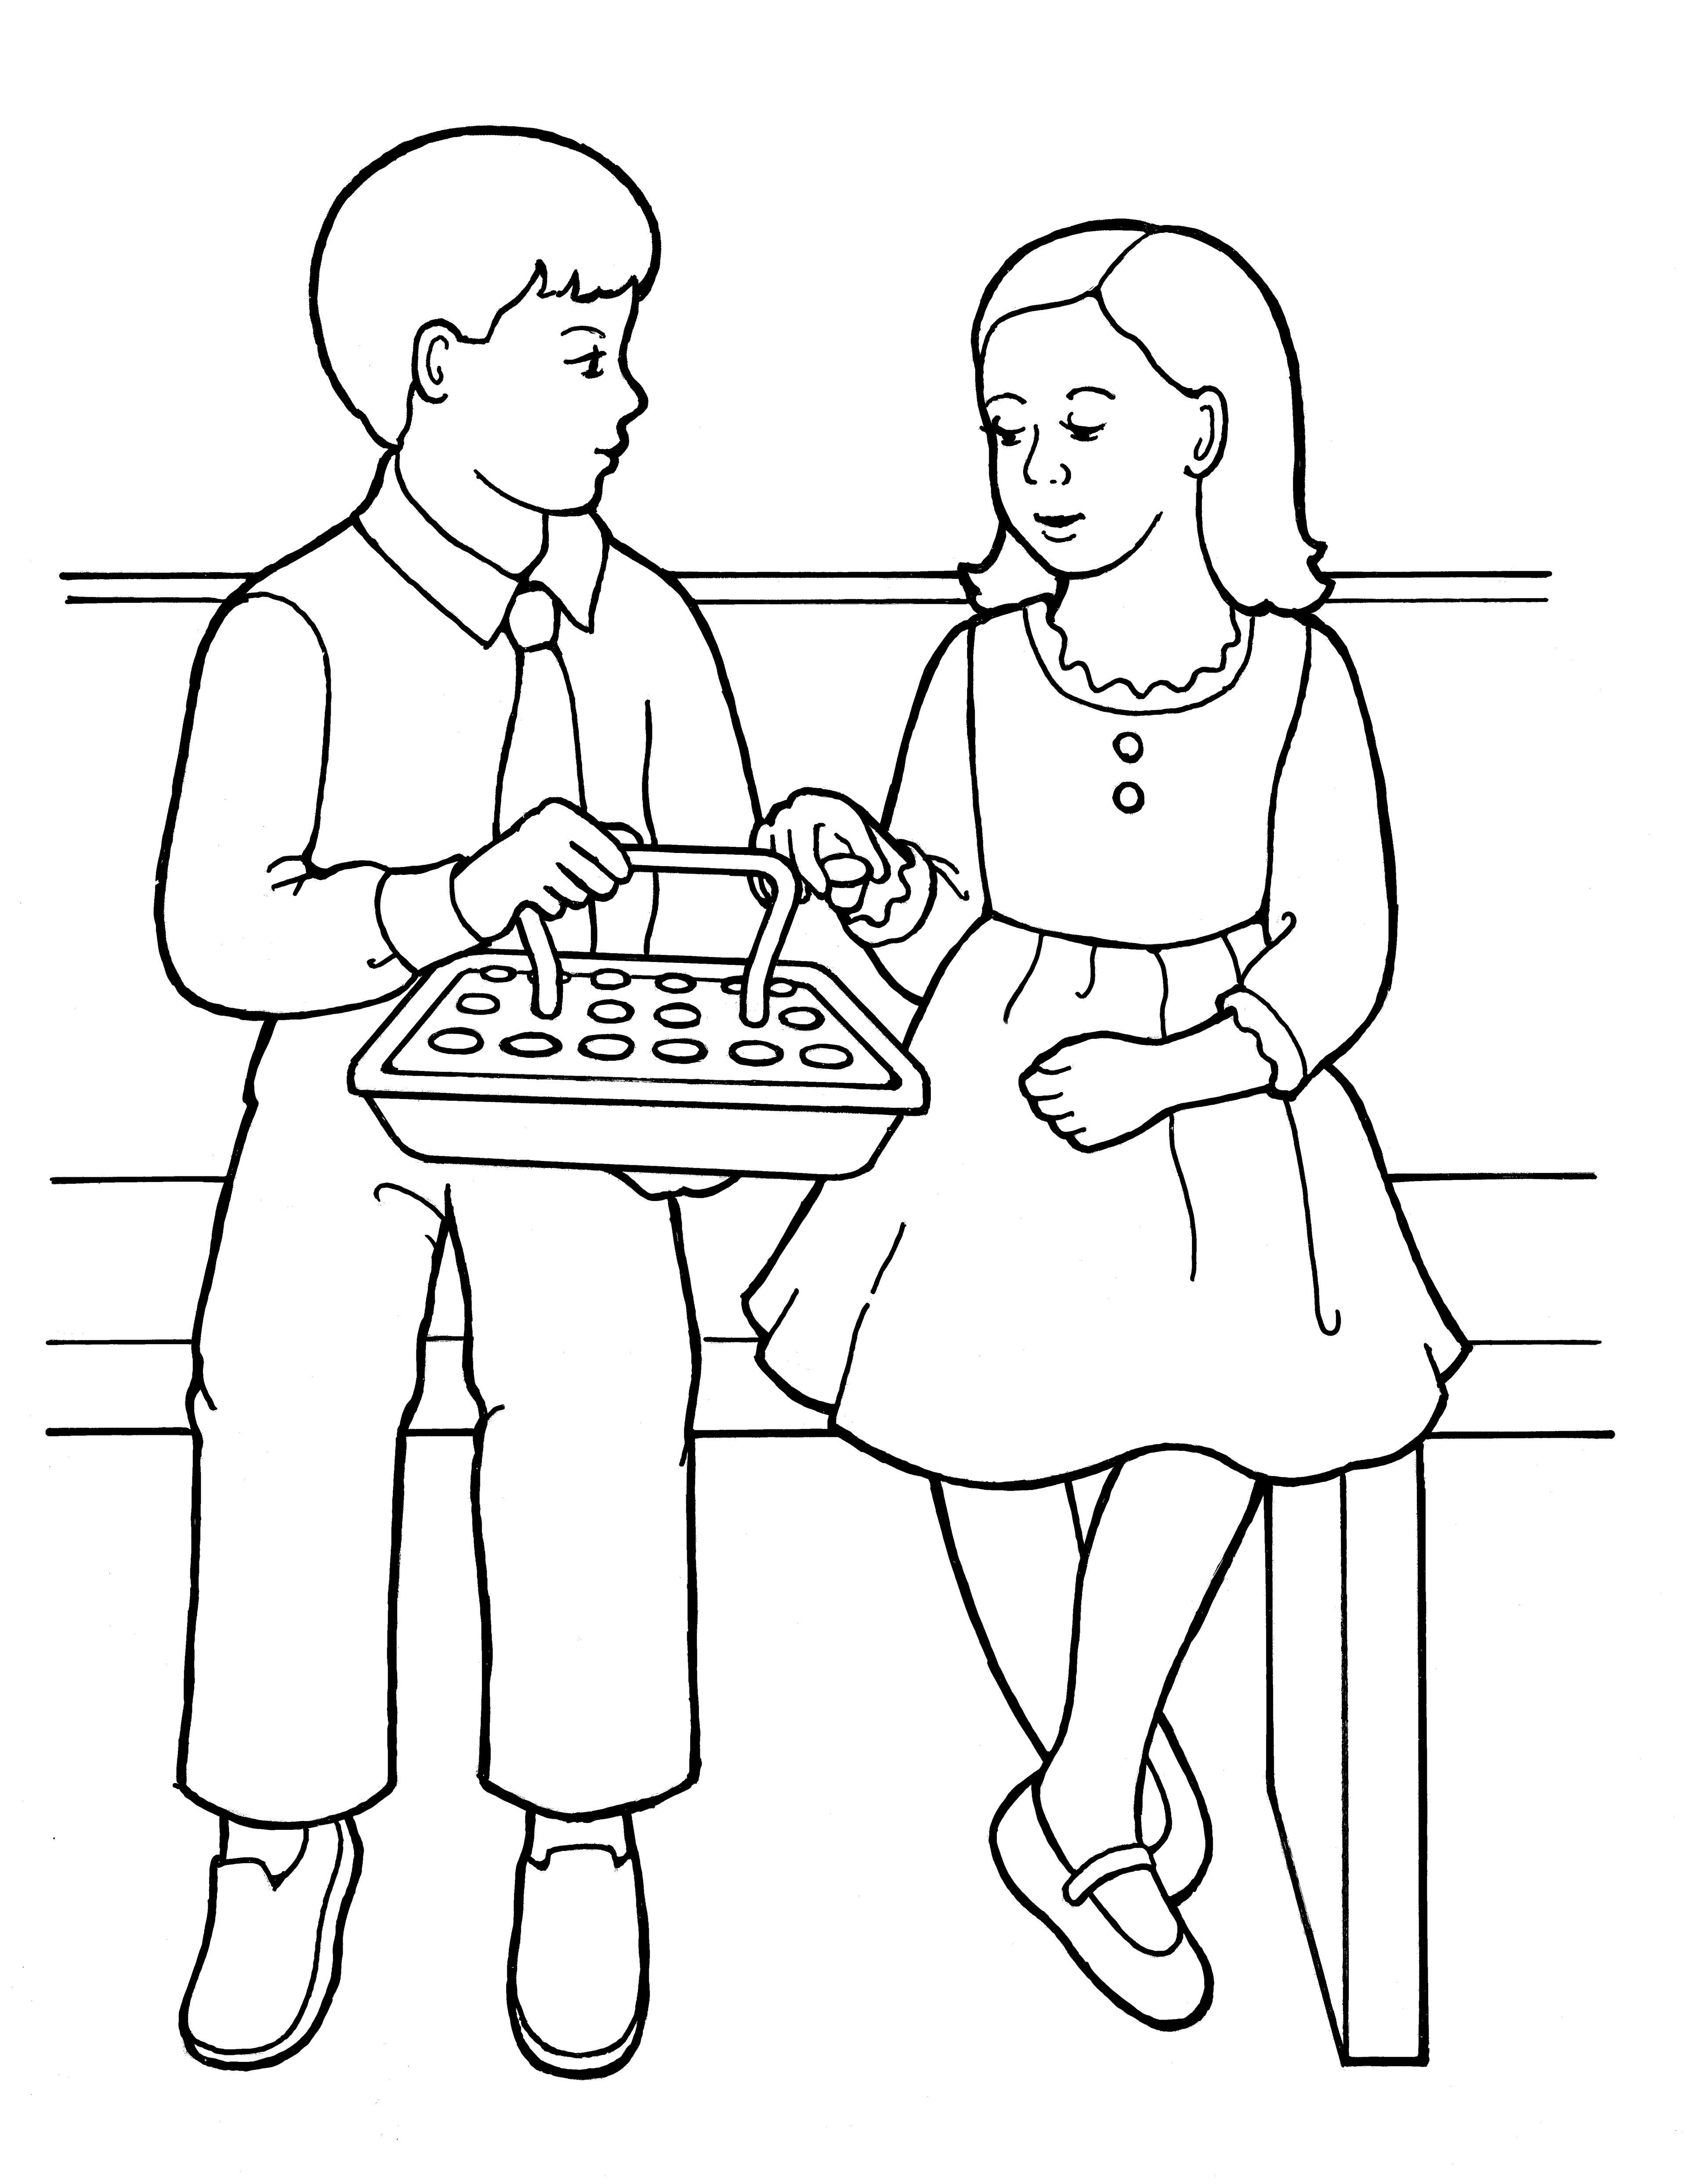 An illustration of a young girl and young boy partaking of the sacrament water, from the nursery manual Behold Your Little Ones (2008), page 115.